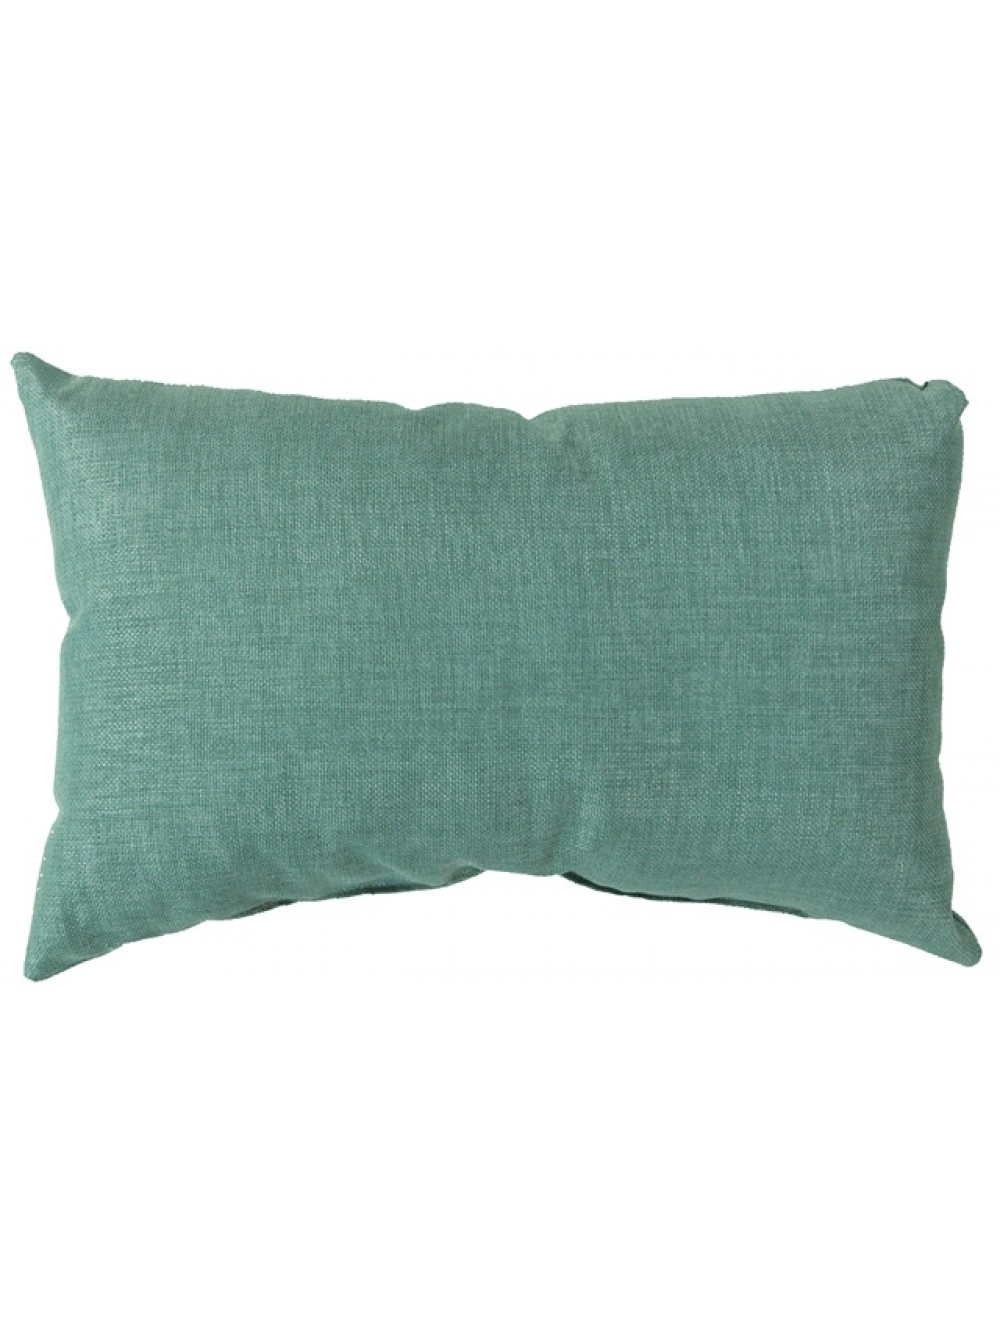 MOSELLE INDOOR/OUTDOOR PILLOW, TEAL - 13" x 20" - Down Insert - Image 0